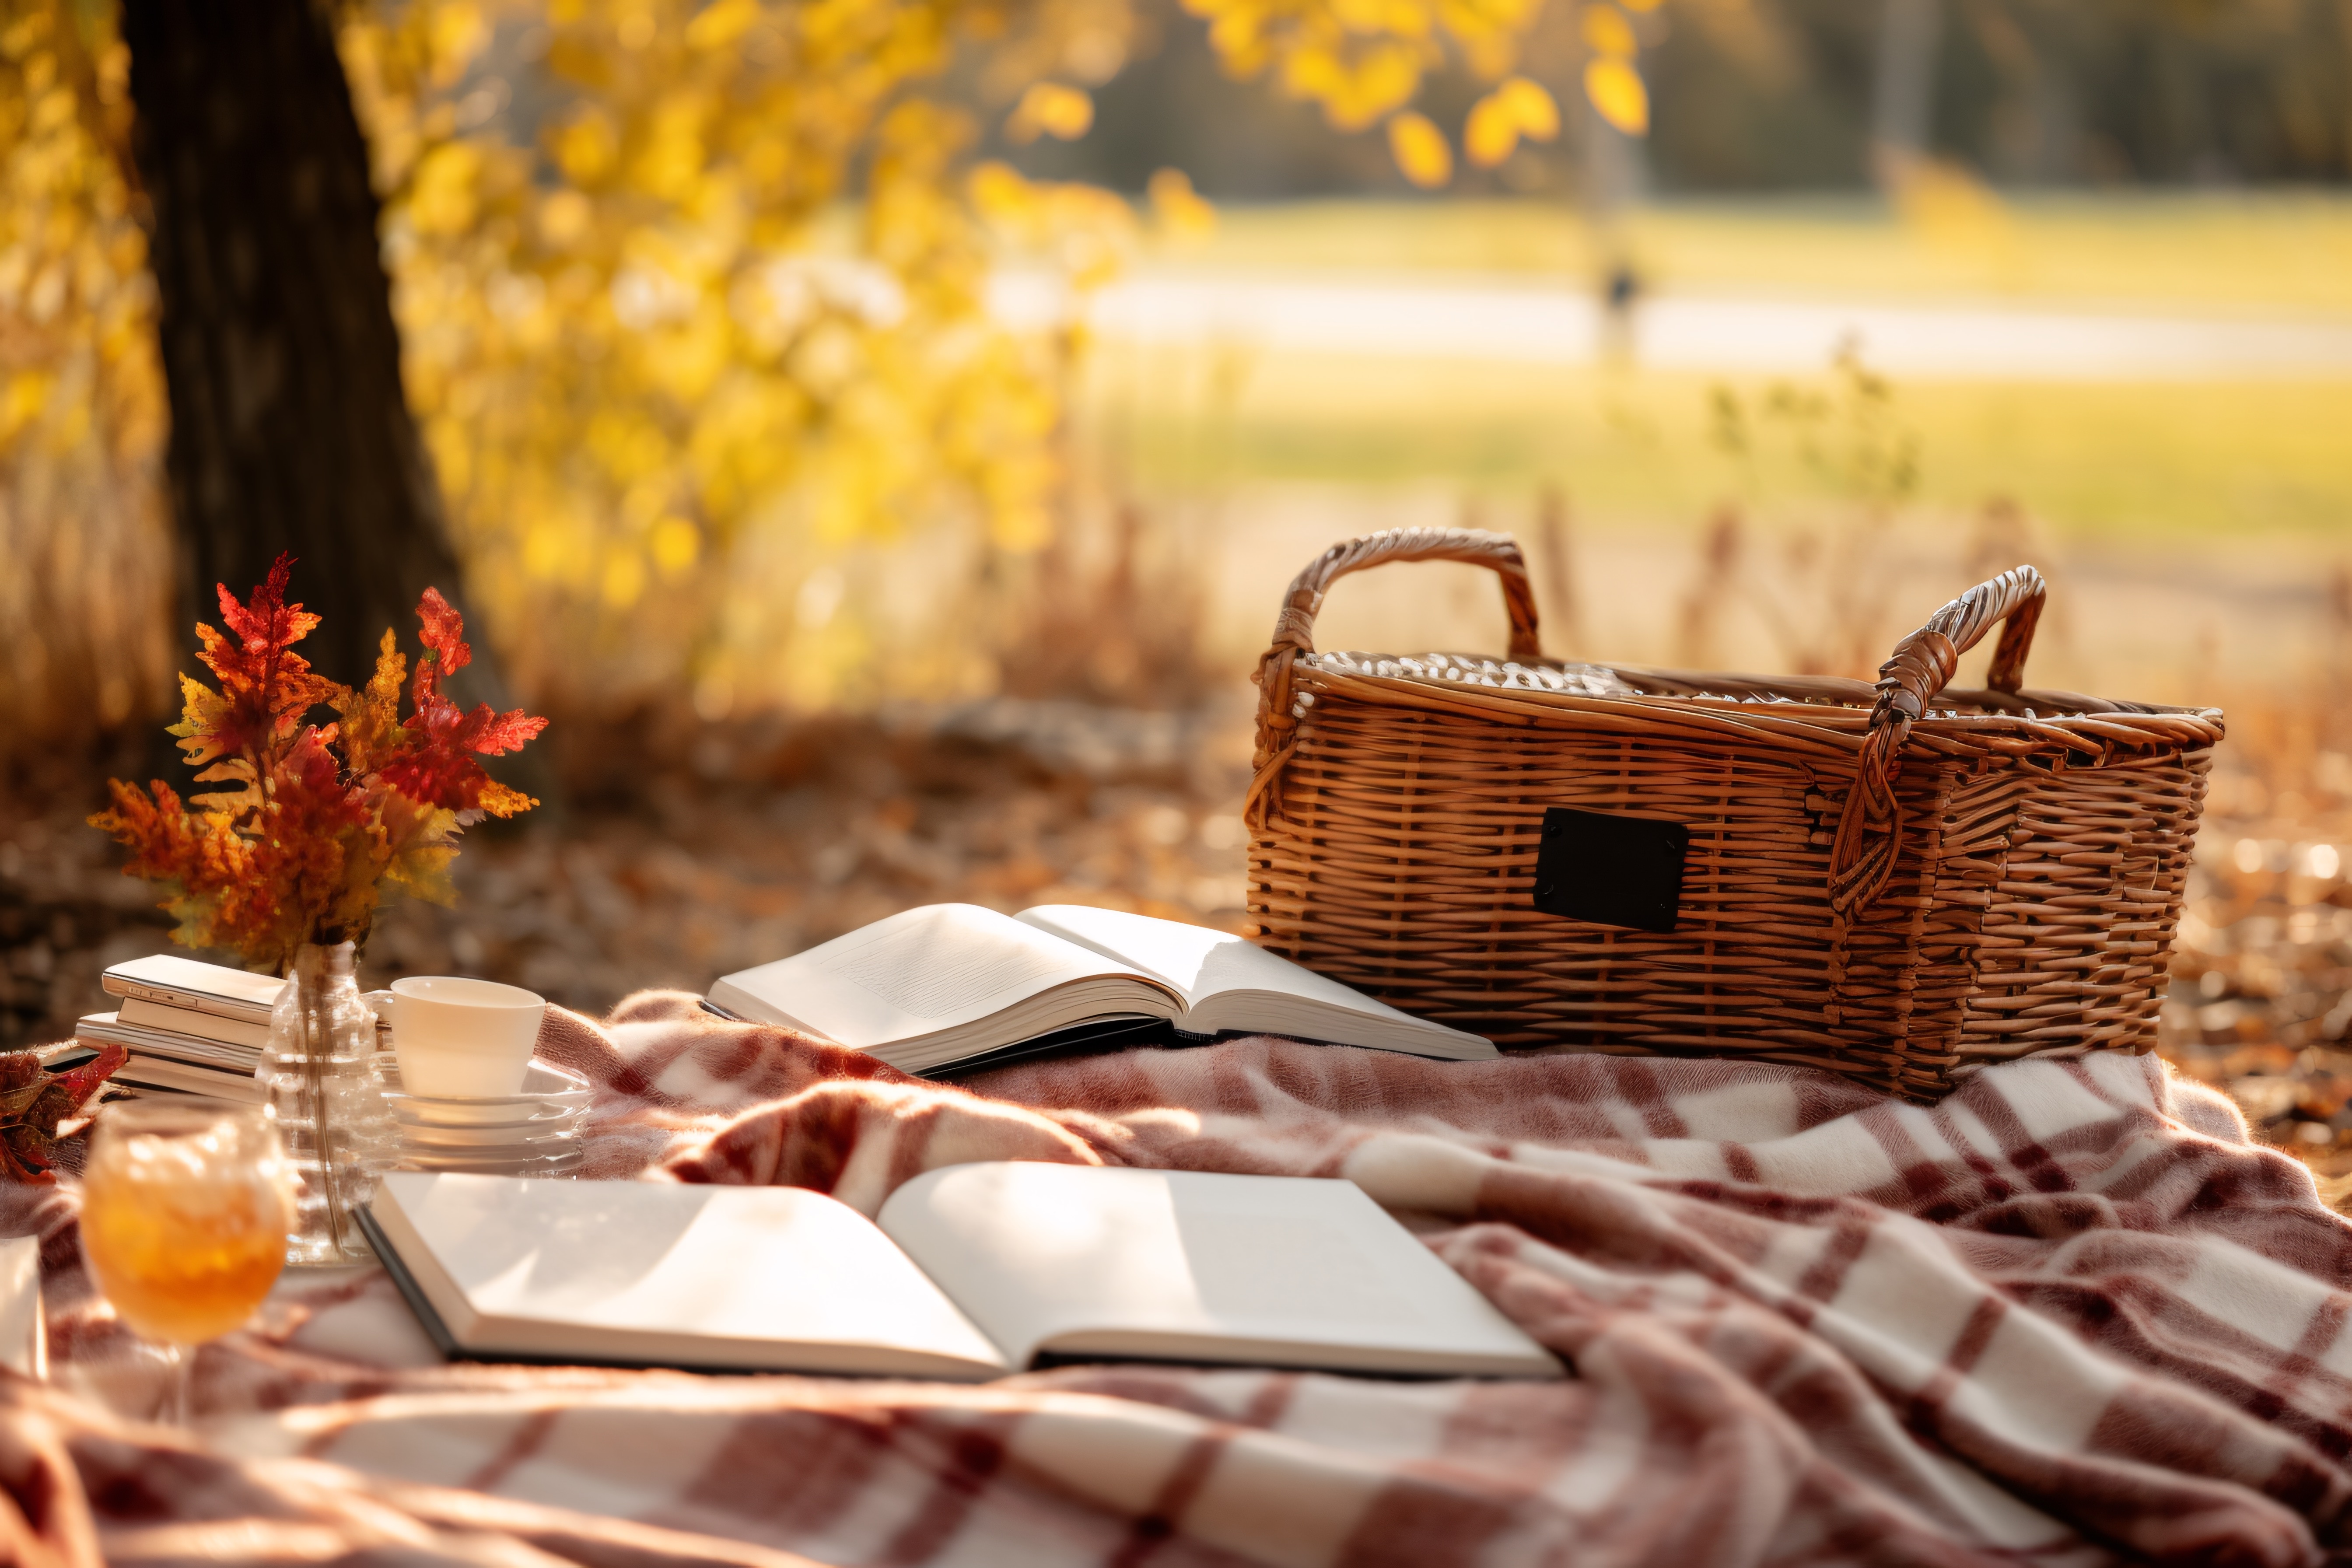 Basket on a picnic blanket on a beautiful fall day